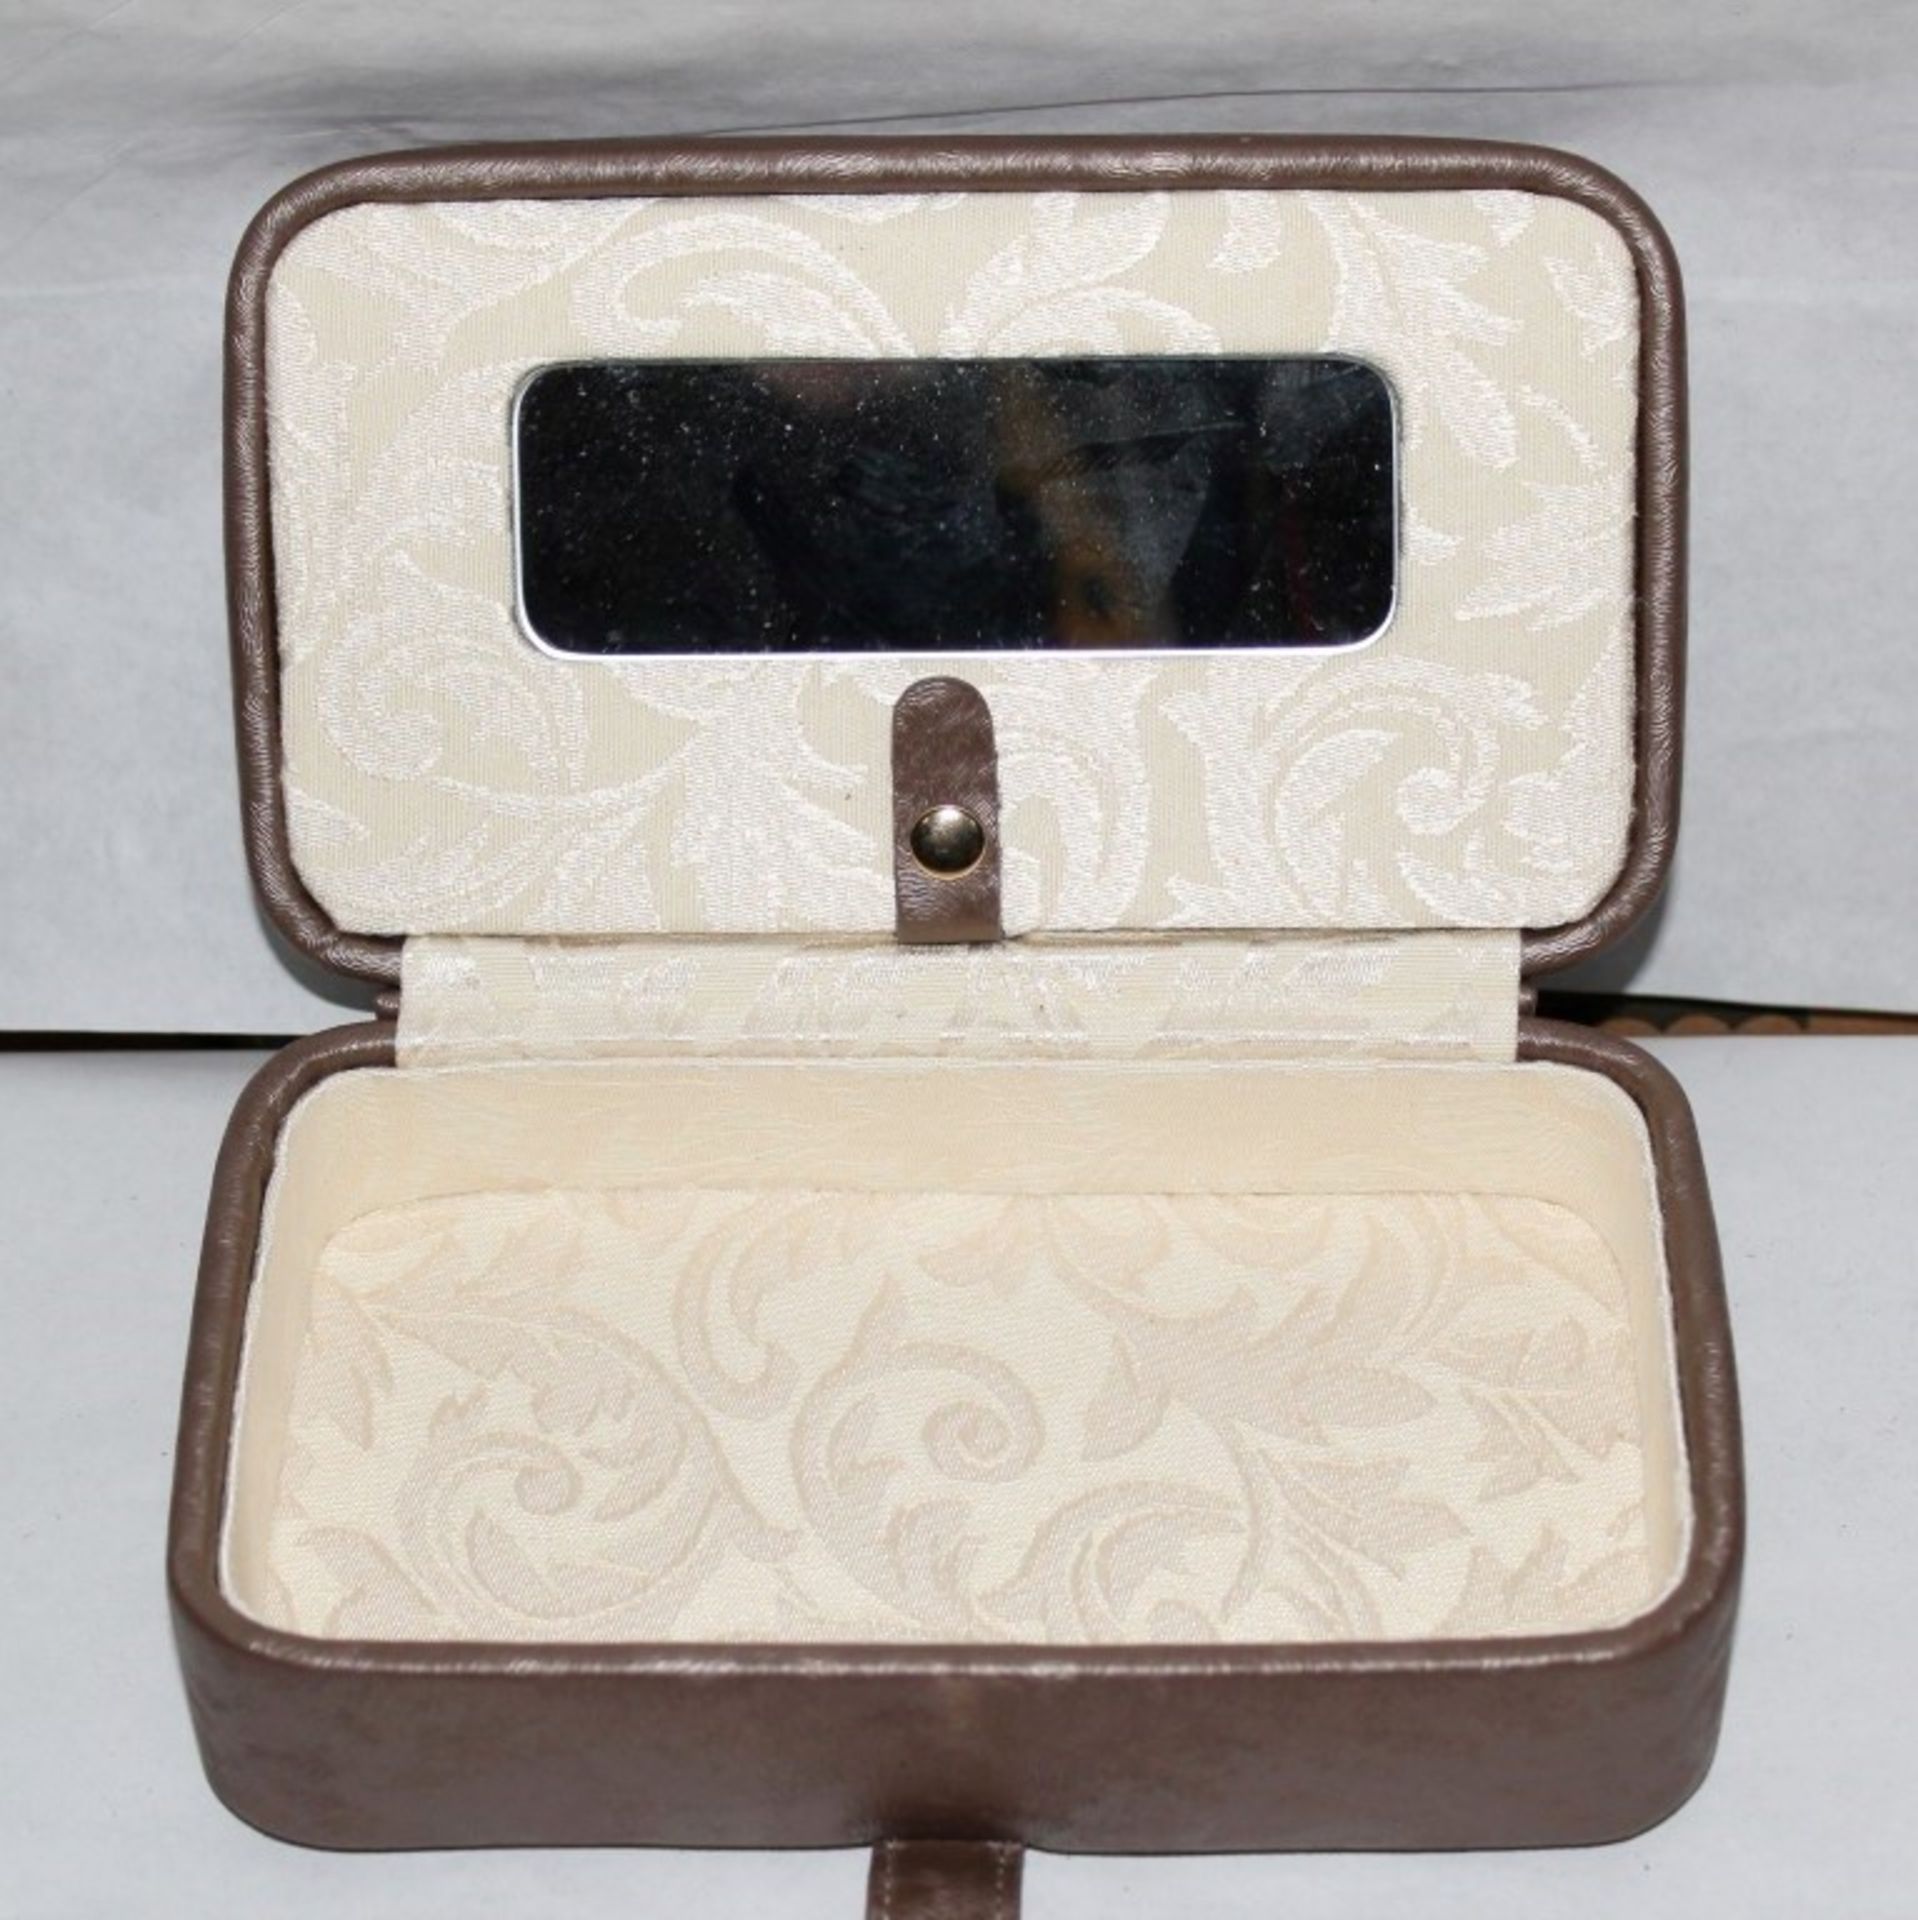 1 x "AB Collezioni" Italian Luxury Jewellery Box With Mirror (33545) - Ref L154 – Ideal For Travel - - Image 2 of 2